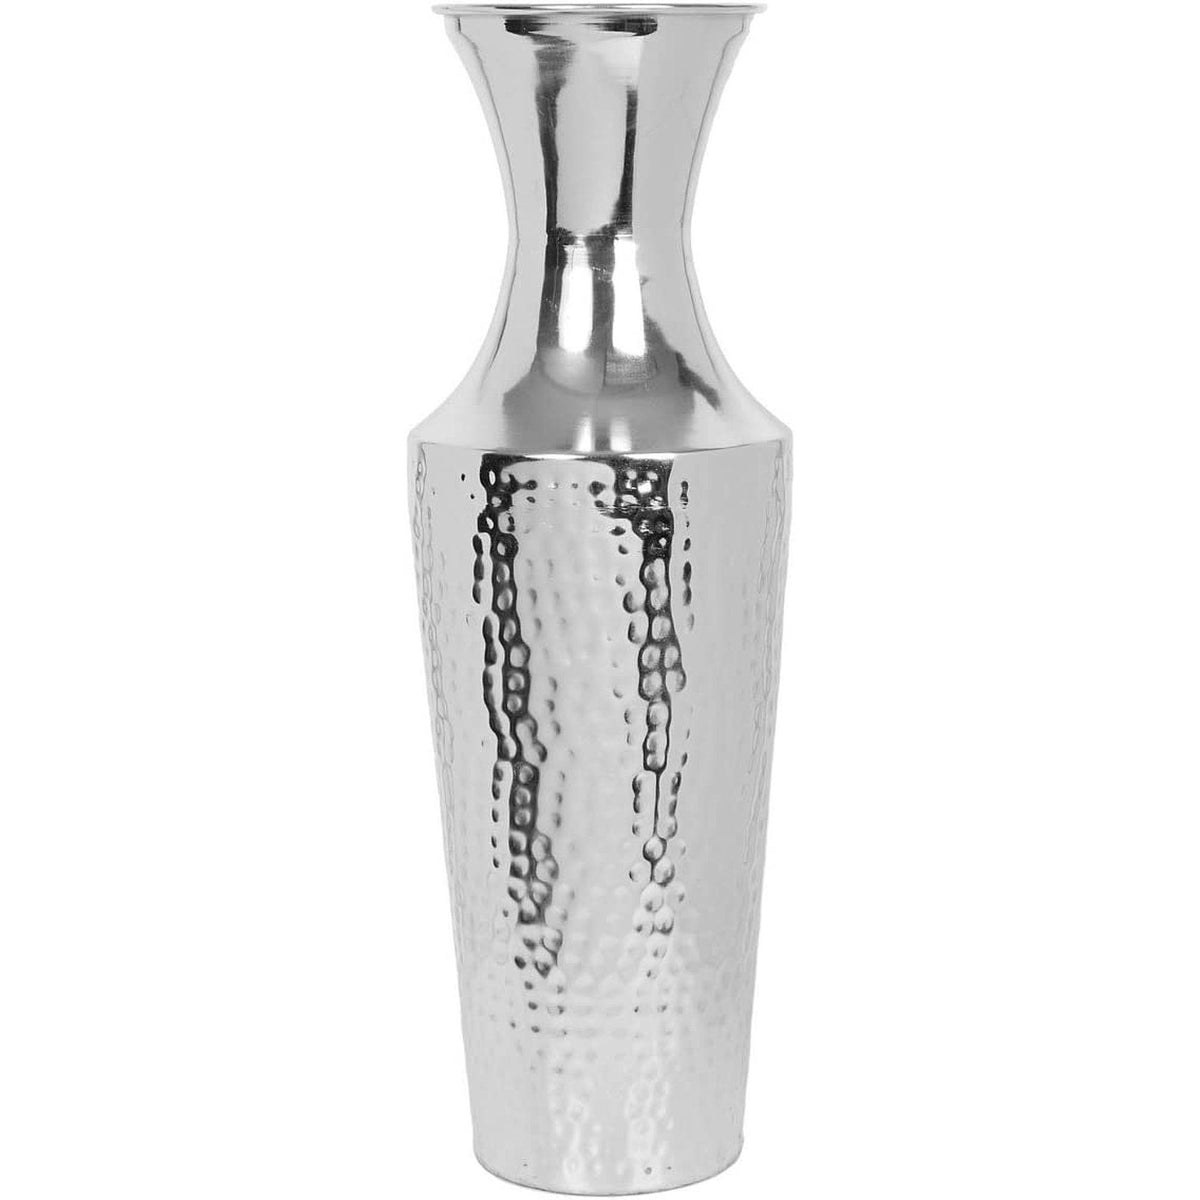 HOSLEY® Metal Floor Vase,  Silver Finish,  18 Inches High